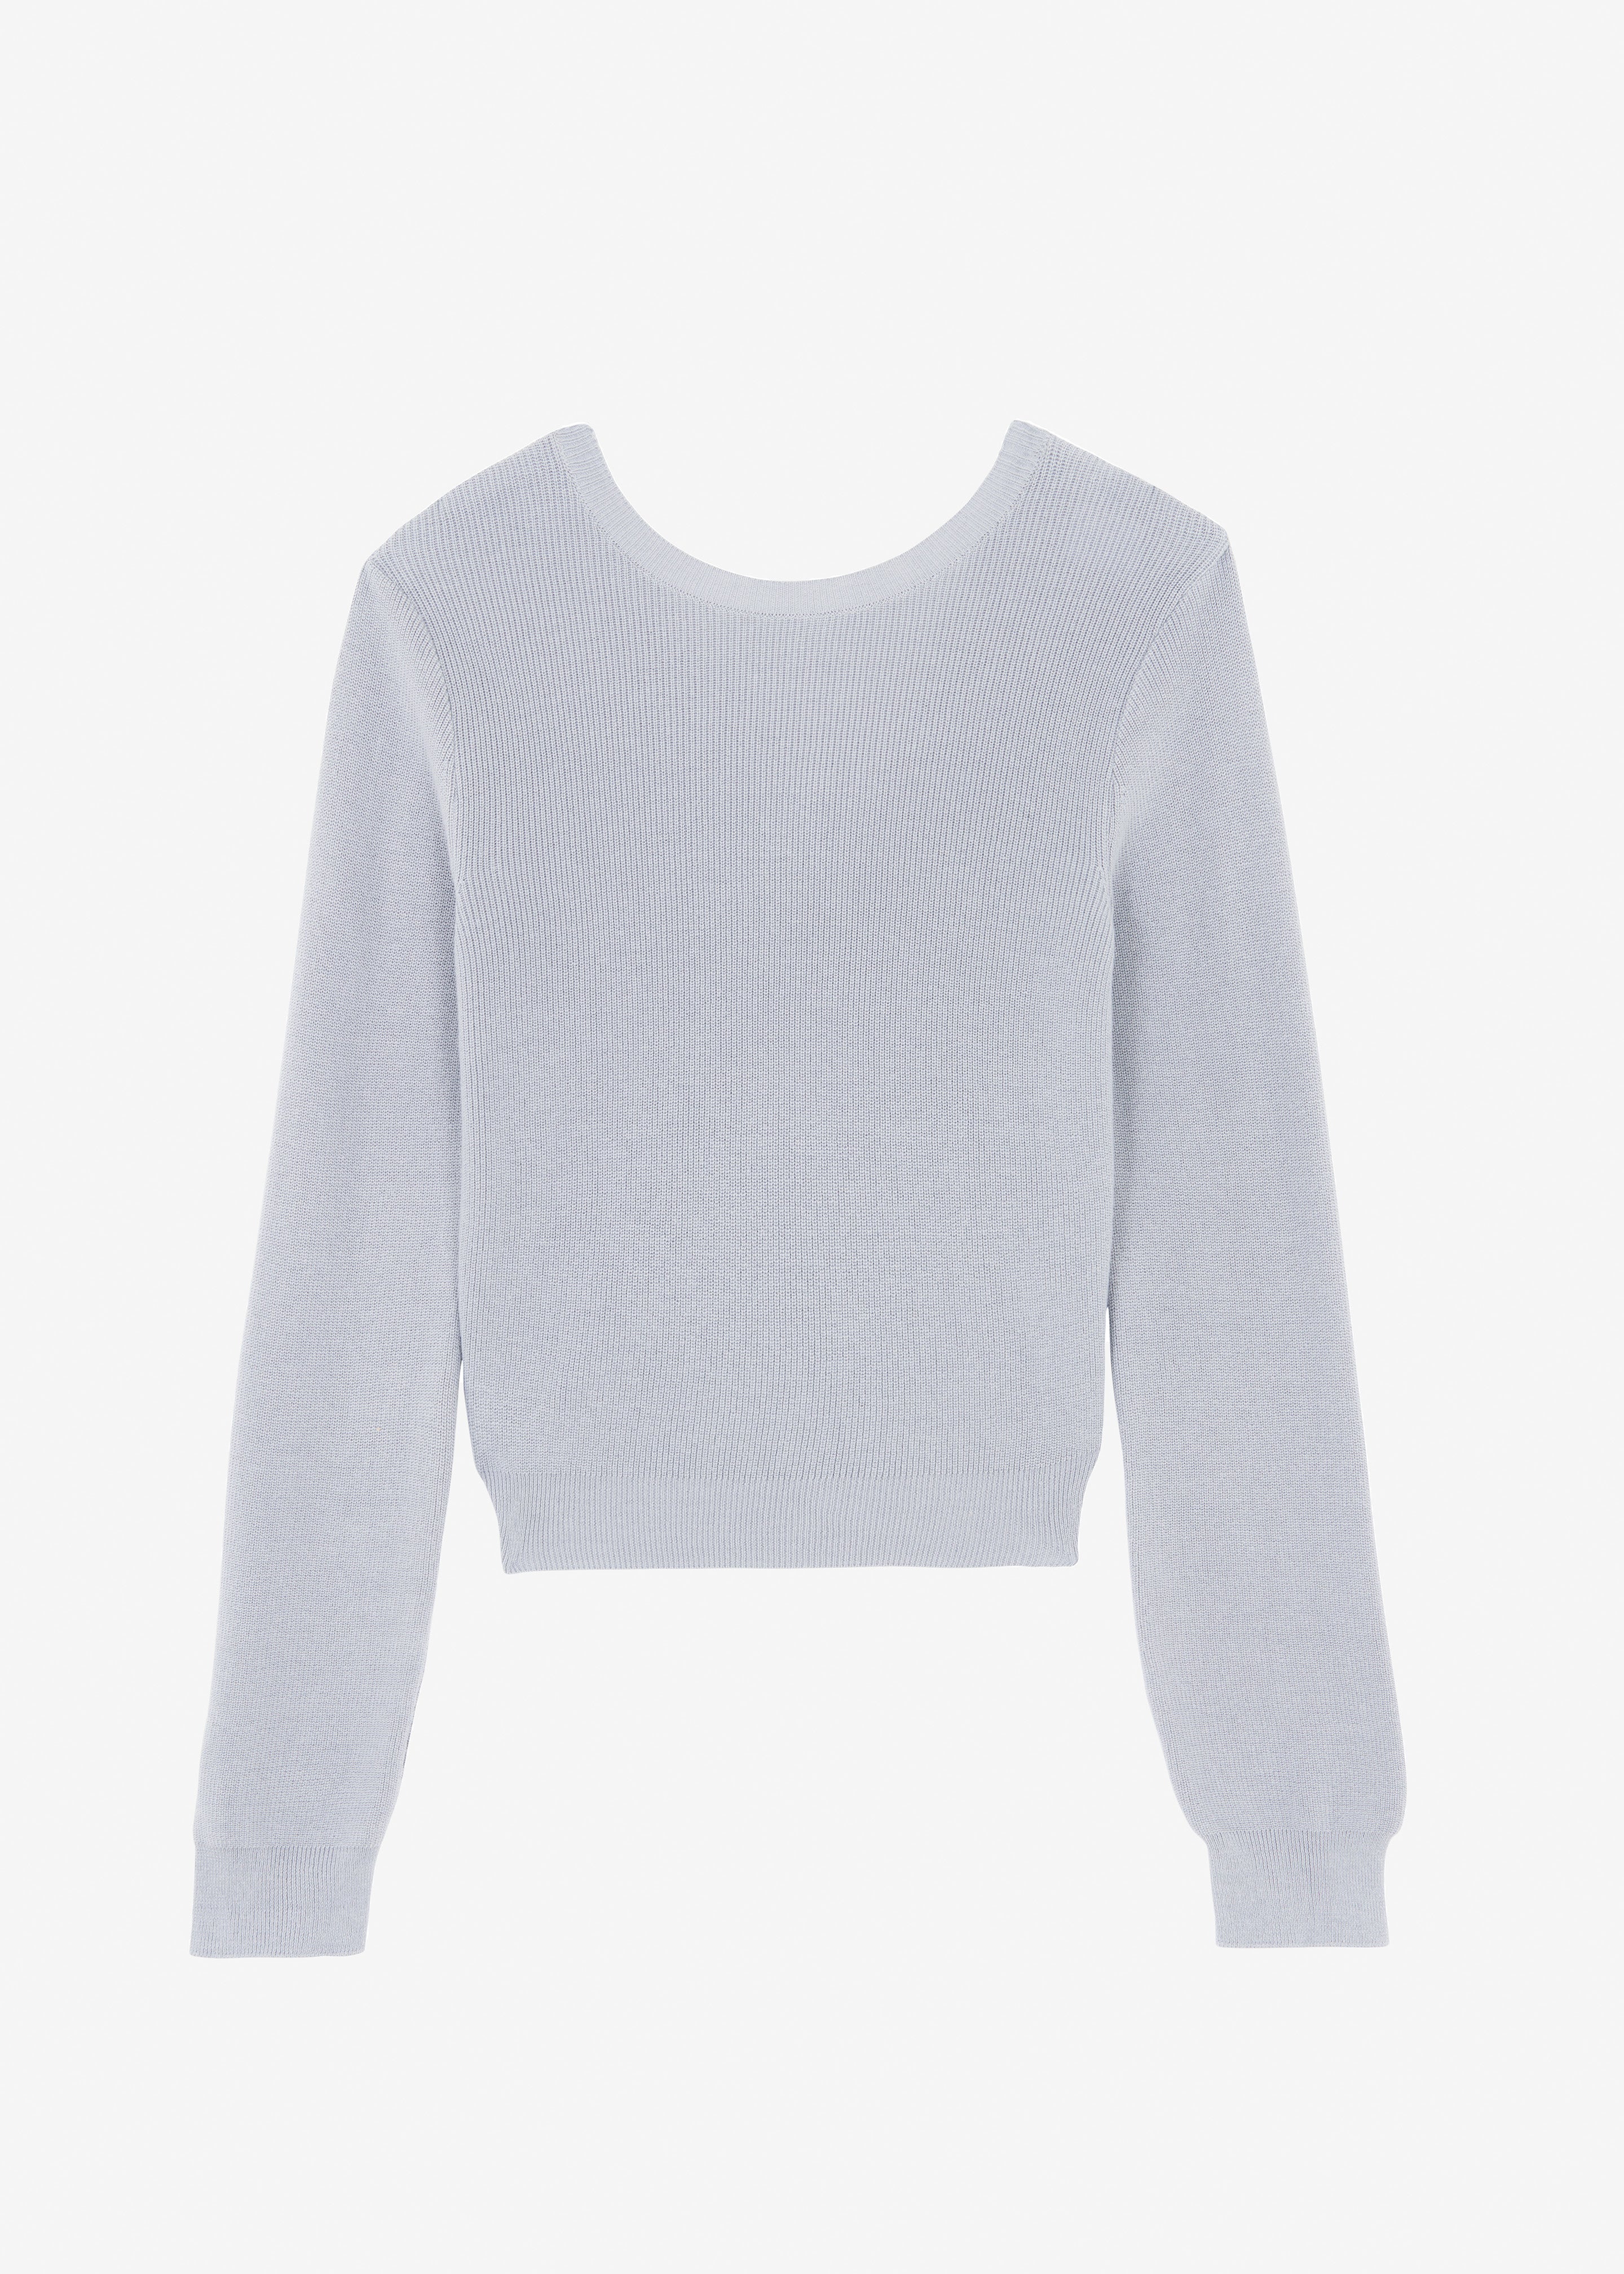 Darcey Twisted Knit Top - Light Grey - 5